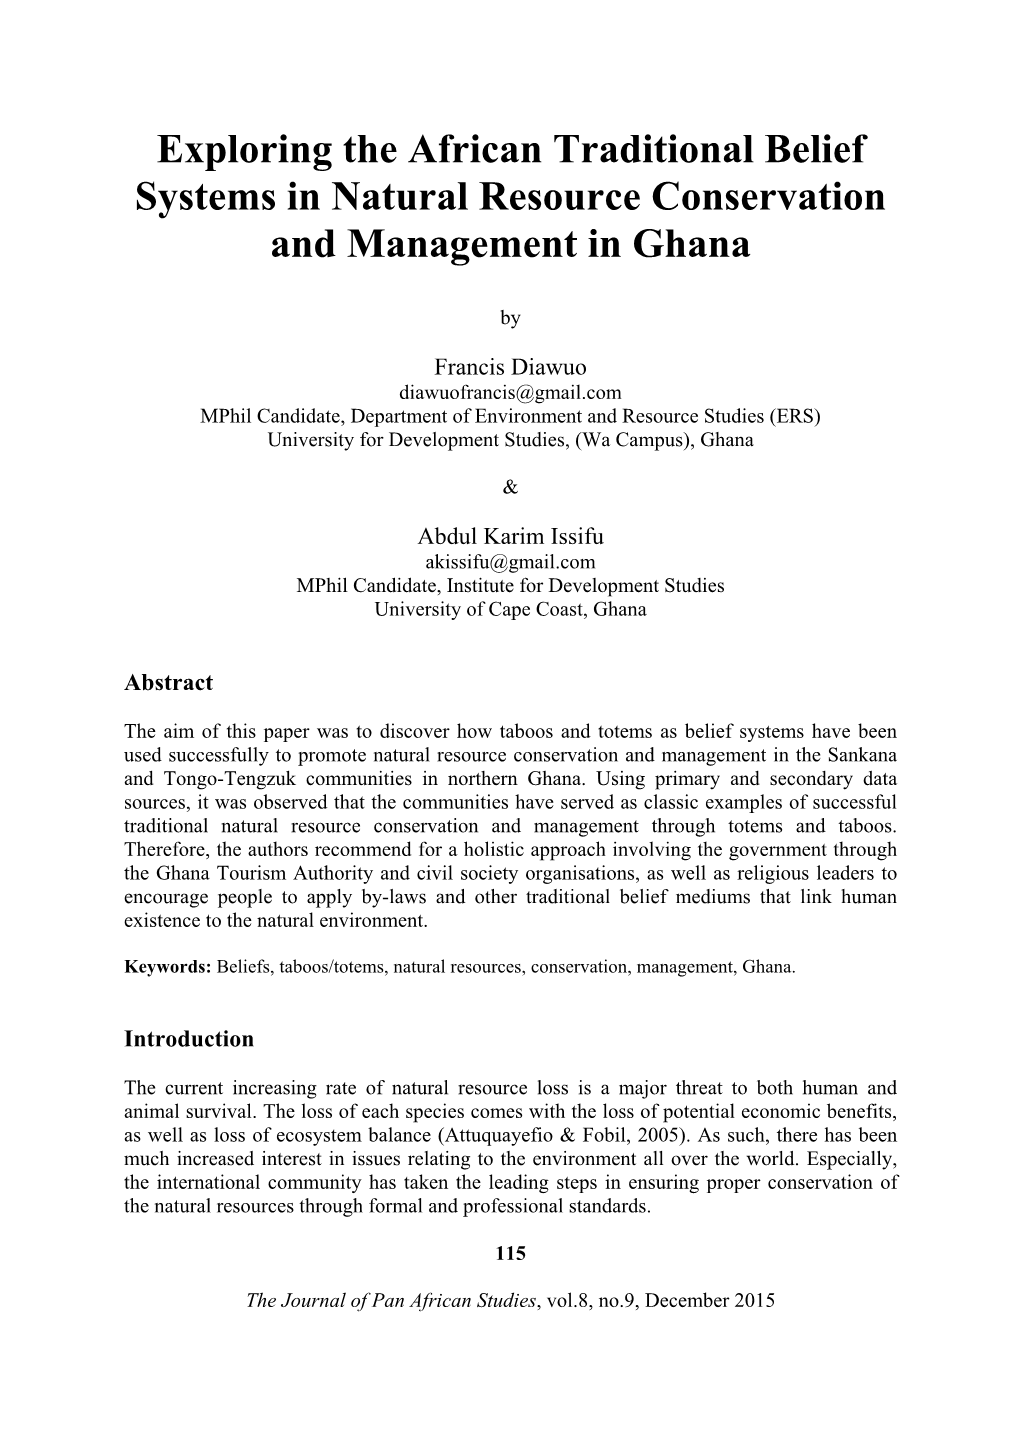 Exploring the African Traditional Belief Systems in Natural Resource Conservation and Management in Ghana